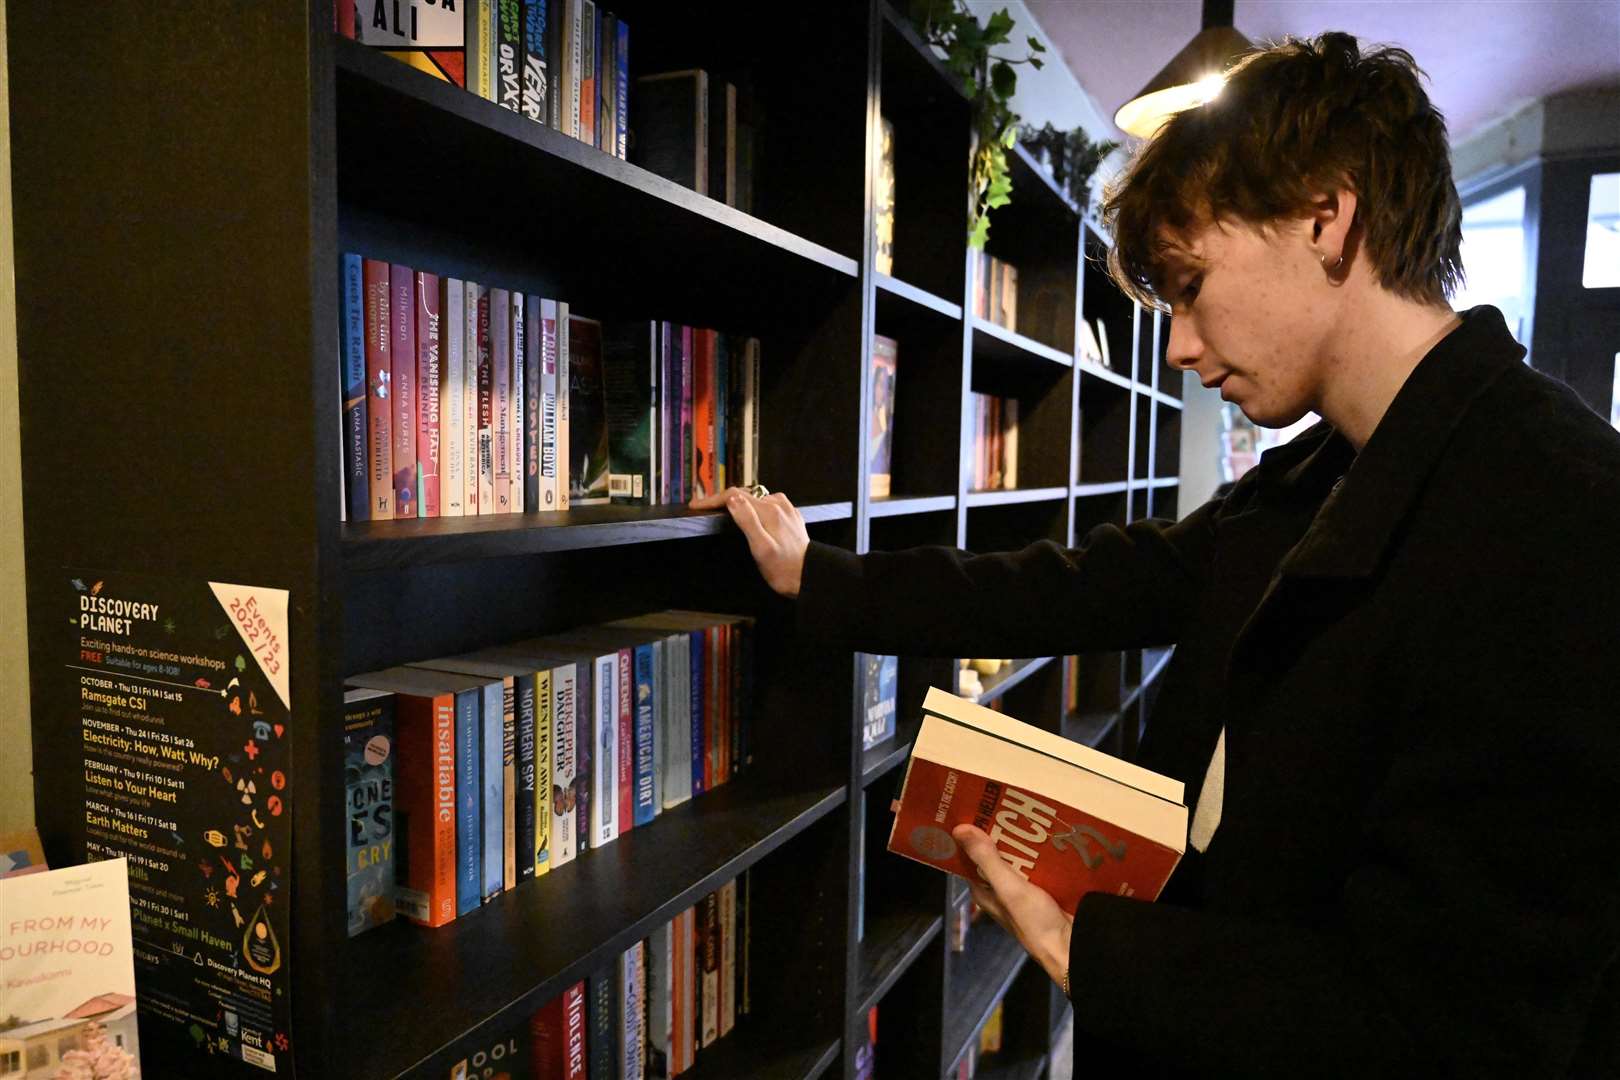 A customer searches through the book shelves in support of the shop. Picture: Barry Goodwin